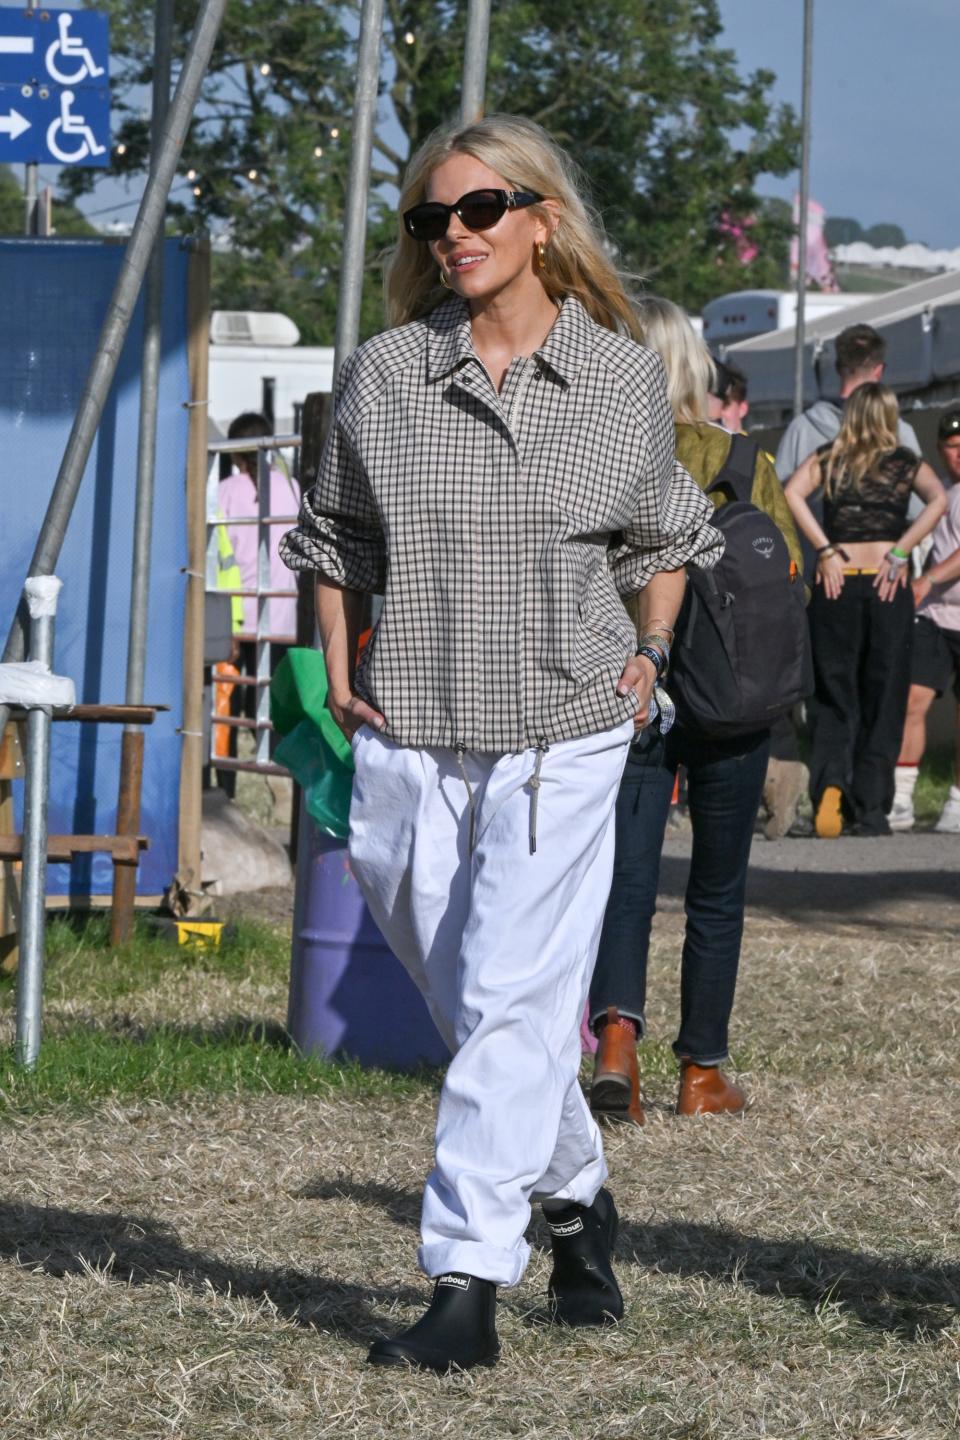 GLASTONBURY, ENGLAND - JUNE 28: Sienna Miller is seen on day one of the Glastonbury Festival wearing Iconic British heritage brand Barbour on June 28, 2024 in Glastonbury, England. (Photo by Jed Cullen/Dave Benett/Getty Images)